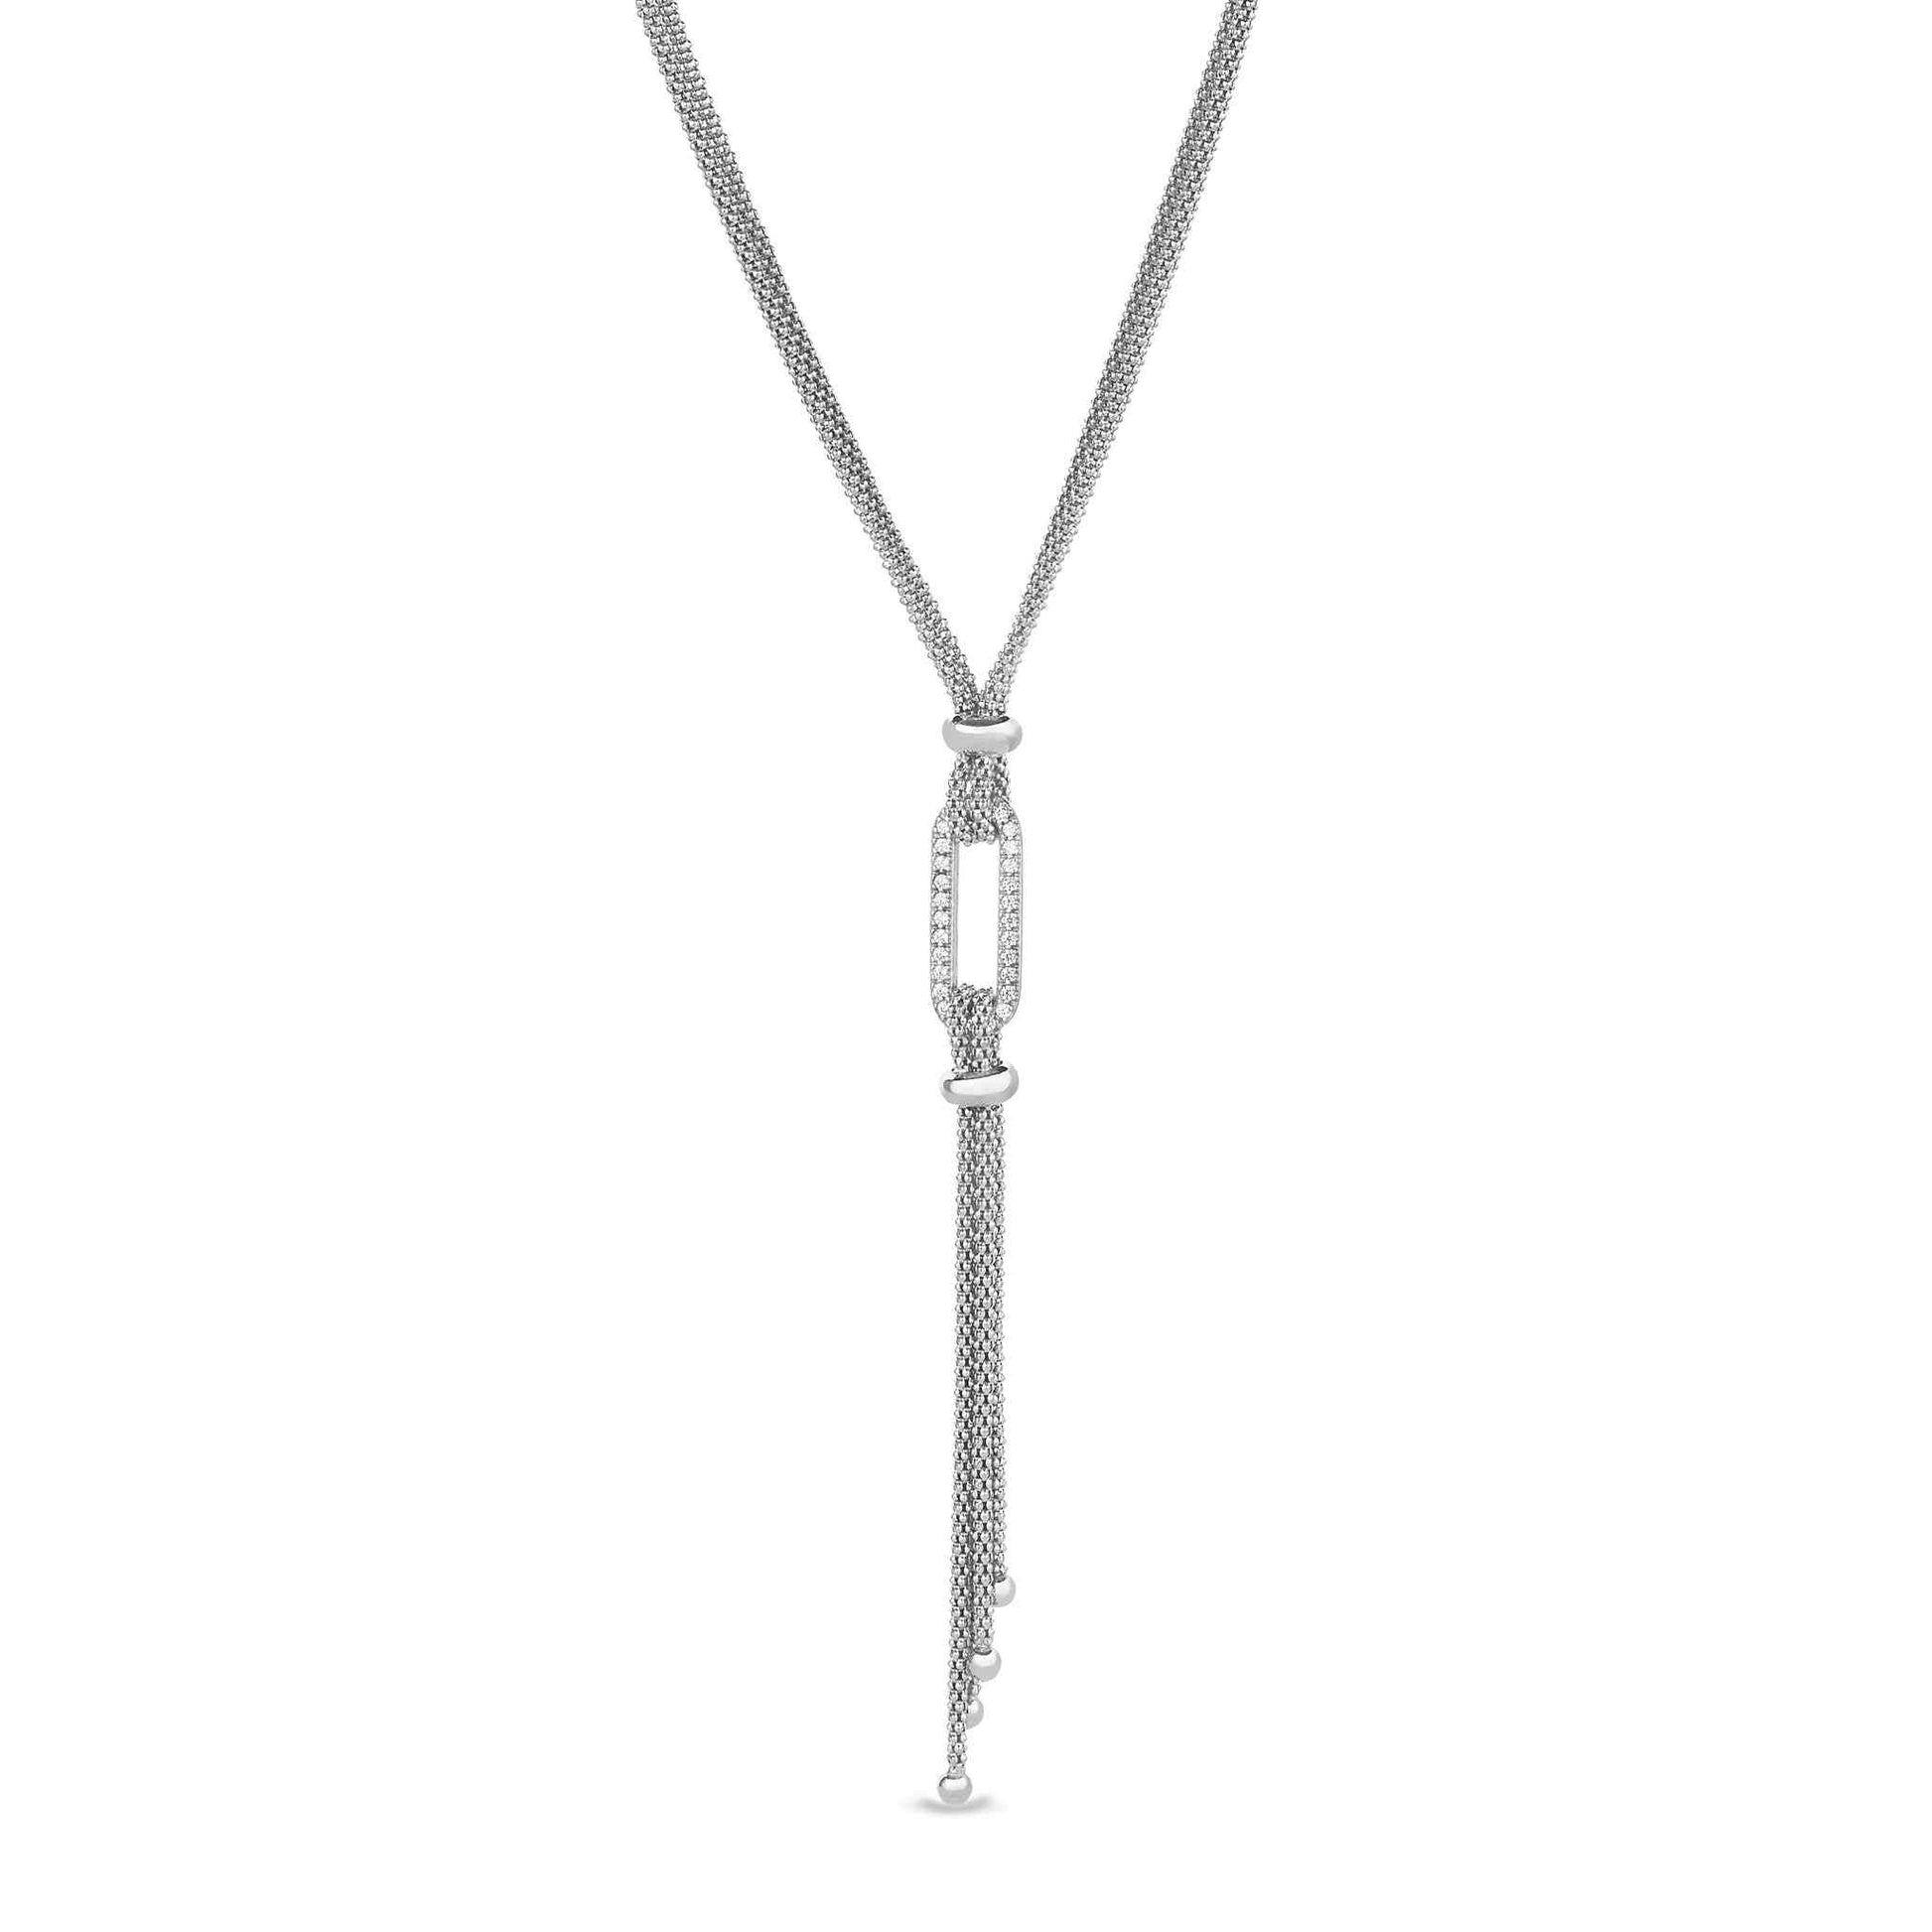 A lariat necklace with simulated diamond paperclip accent displayed on a neutral white background.